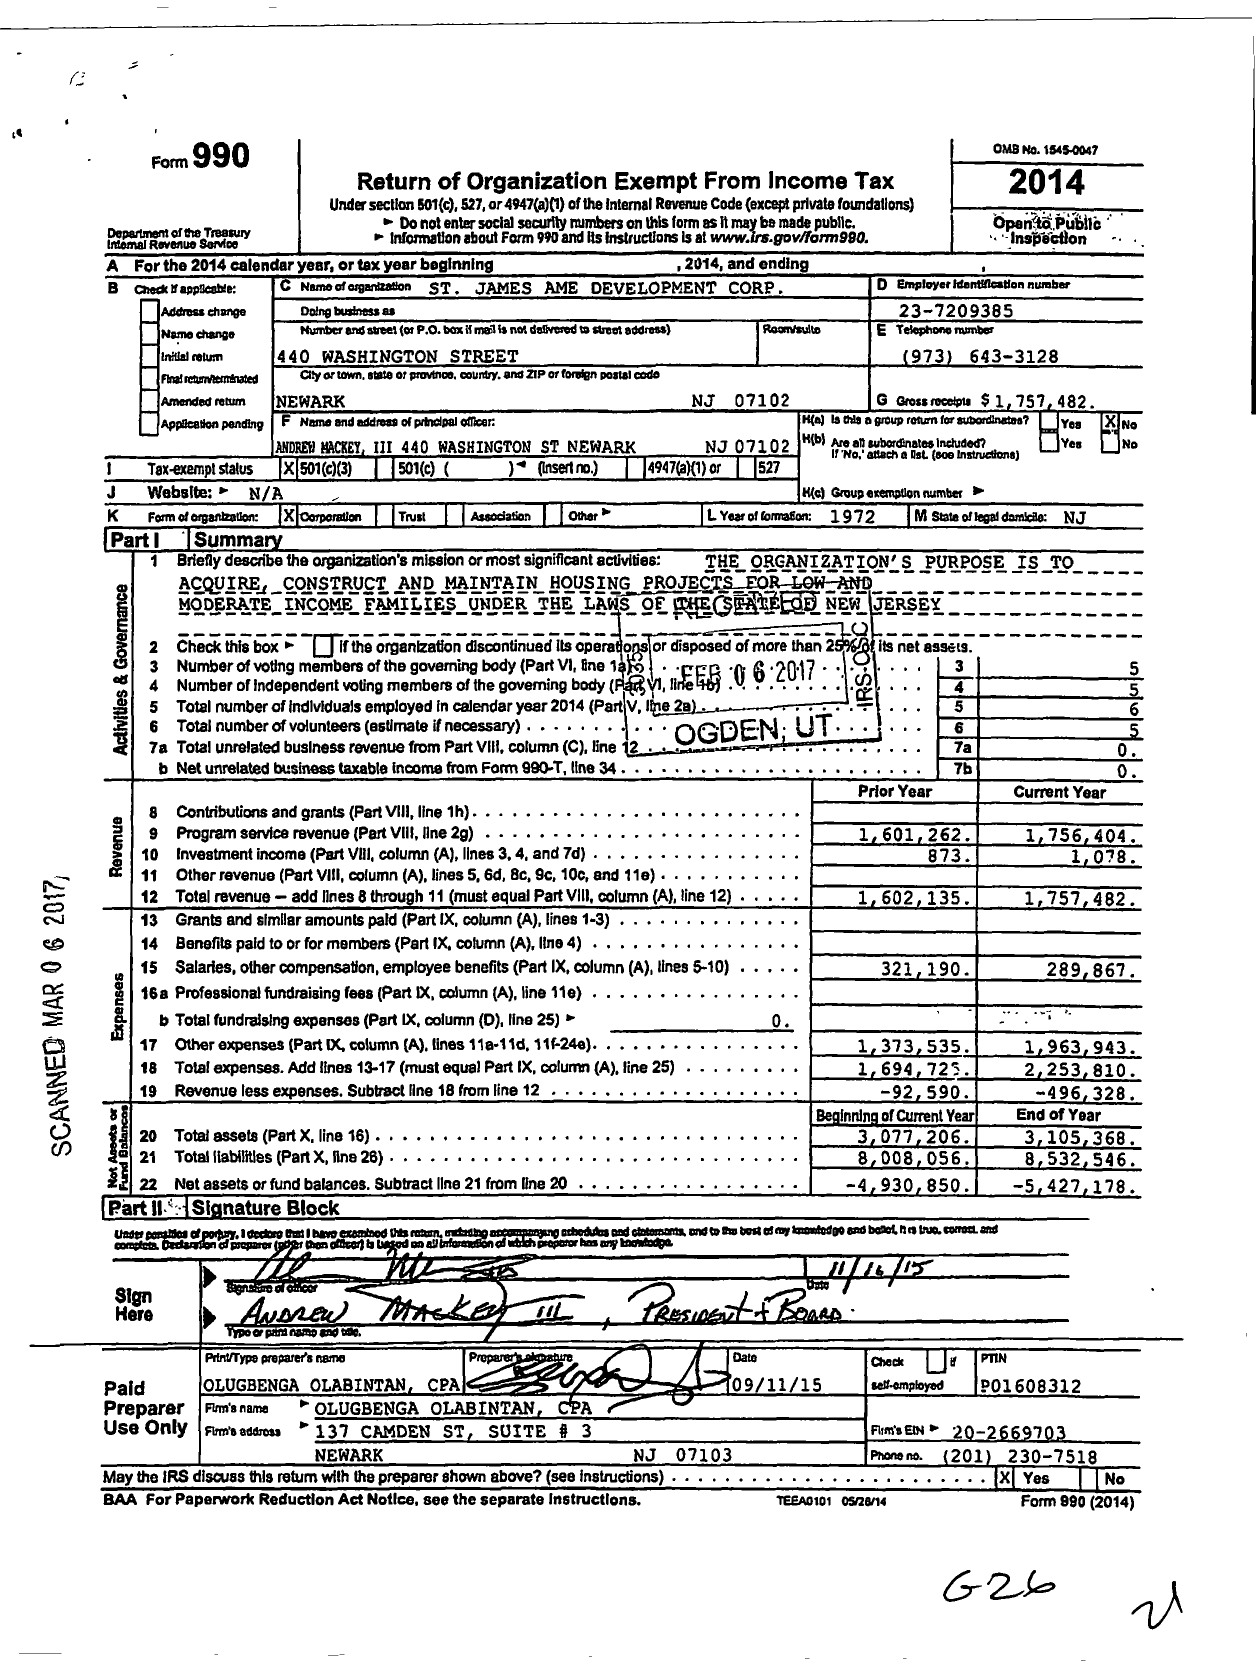 Image of first page of 2014 Form 990 for St. James Ame Development Corporation